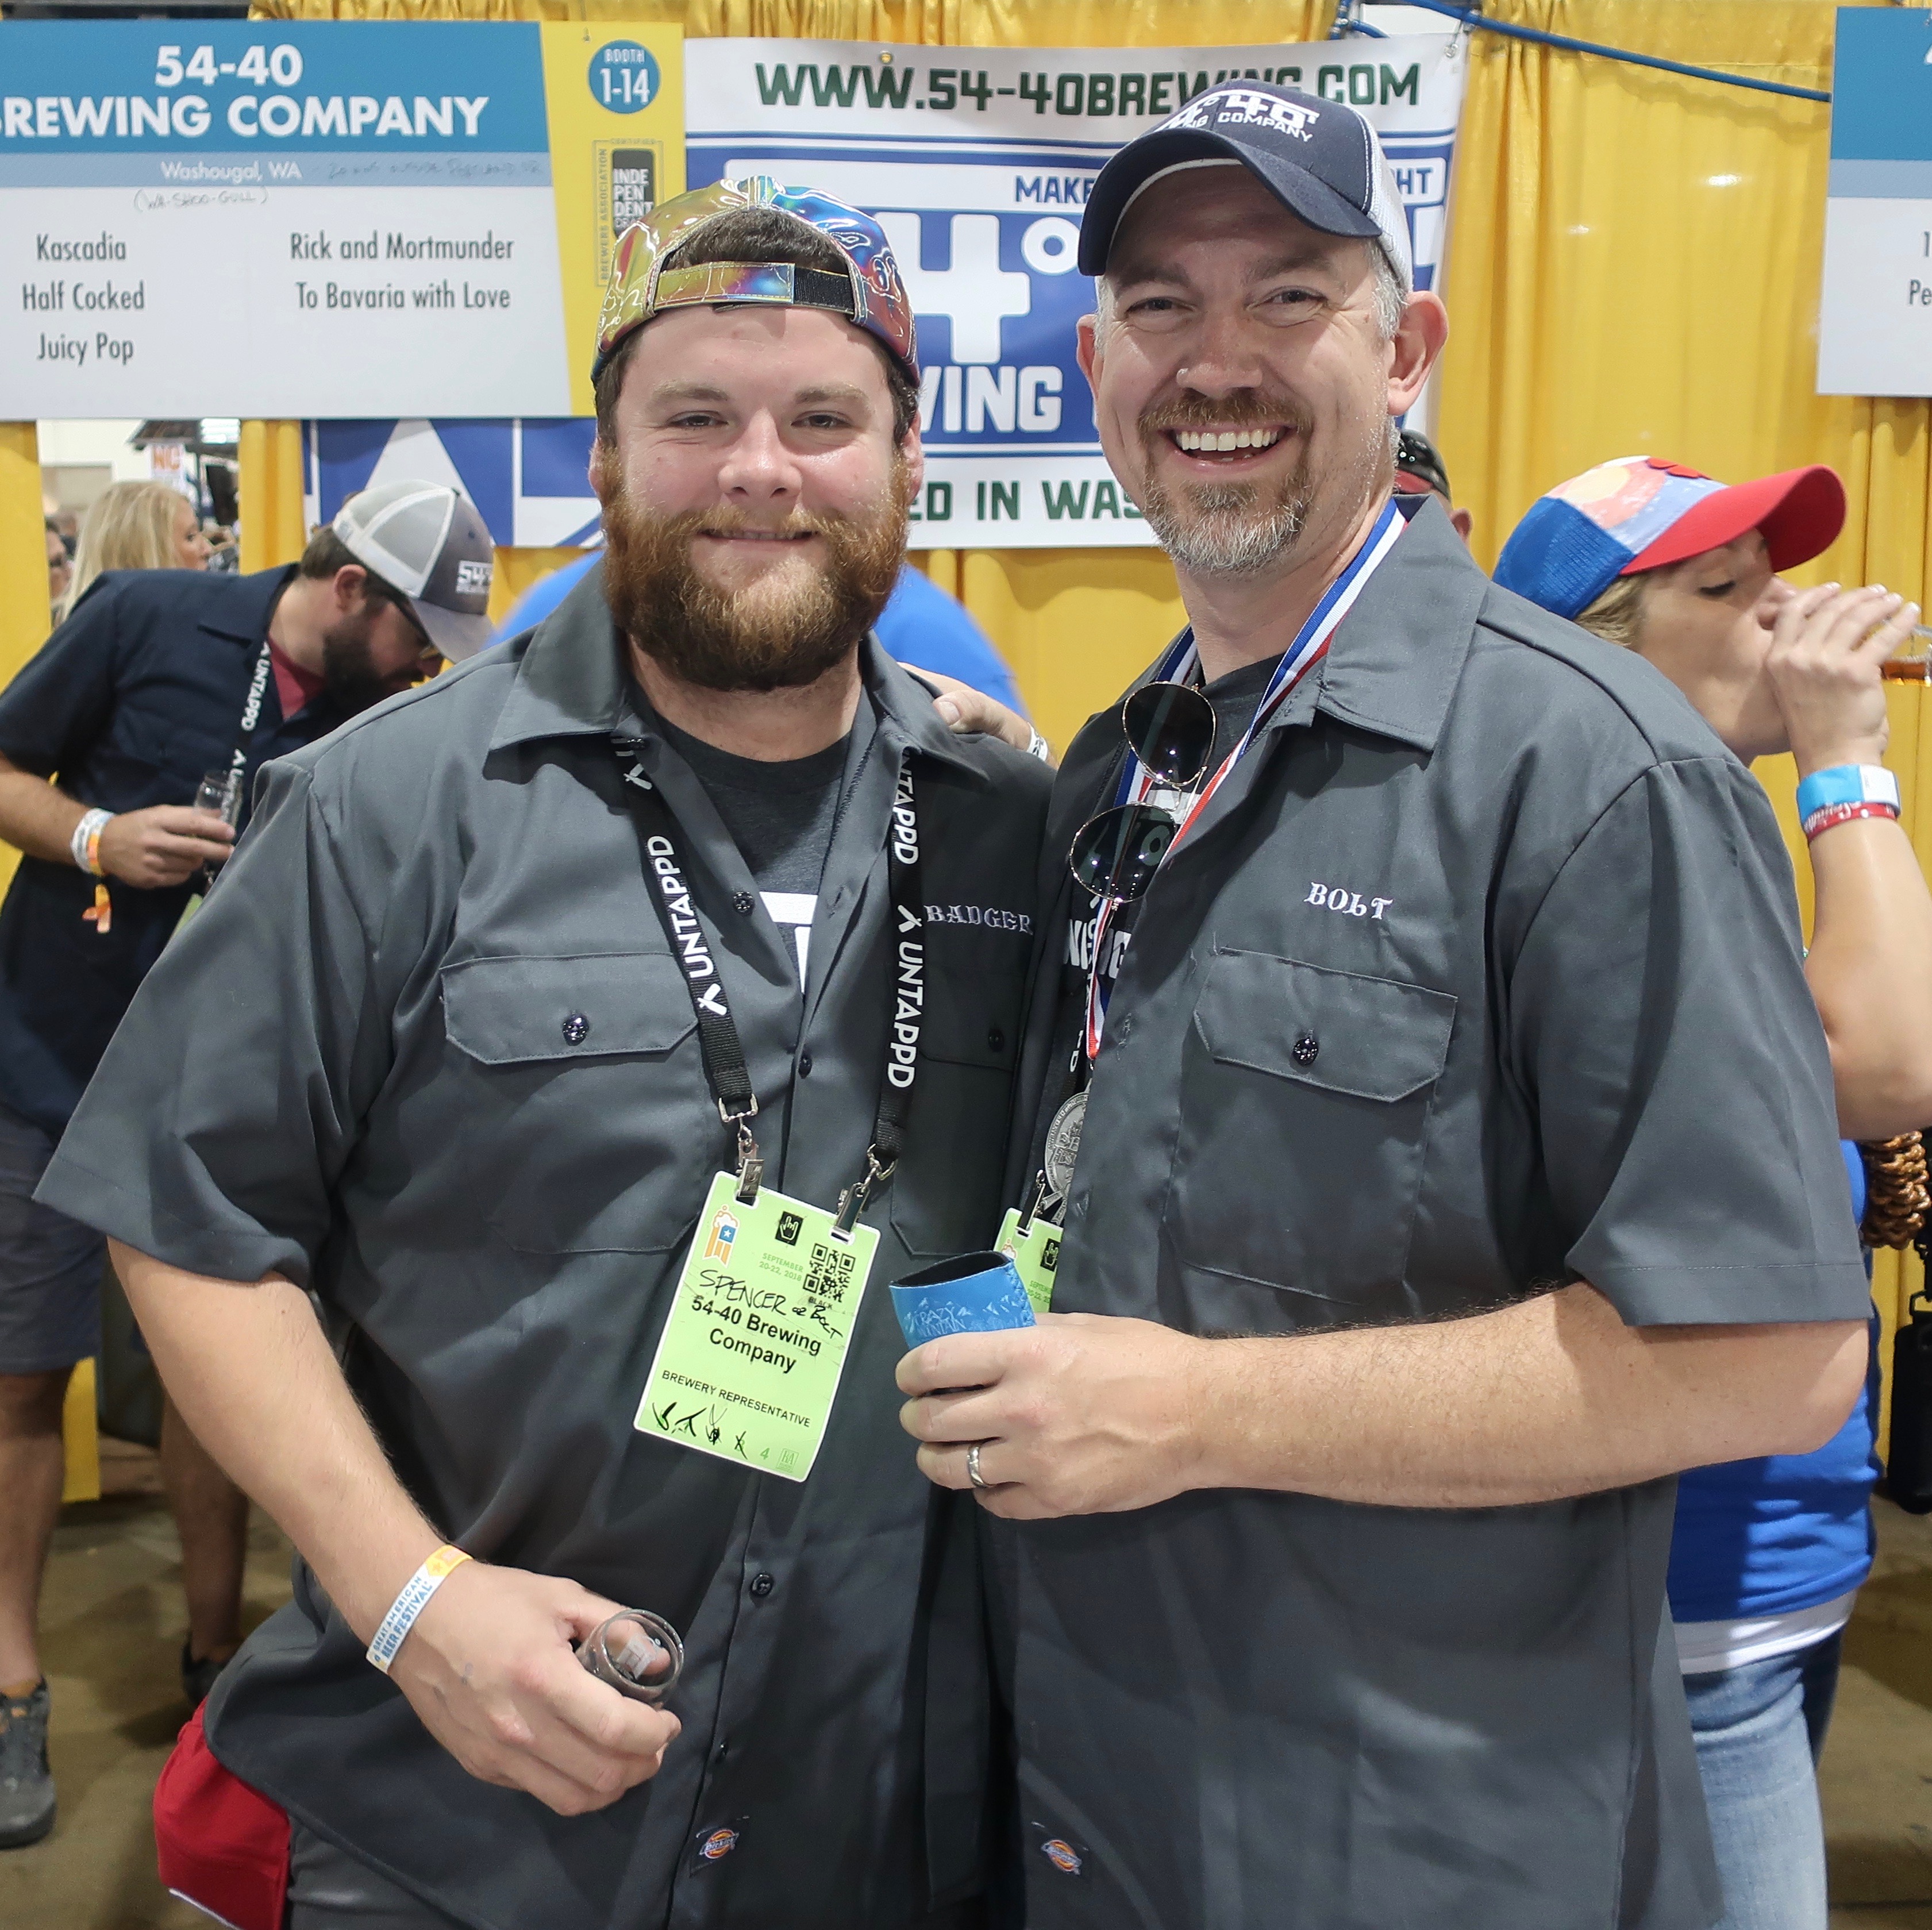 Badger and Bolt Minister from 54°40’ Brewing win a Silver Medal at the 2018 Great American Beer Festival.